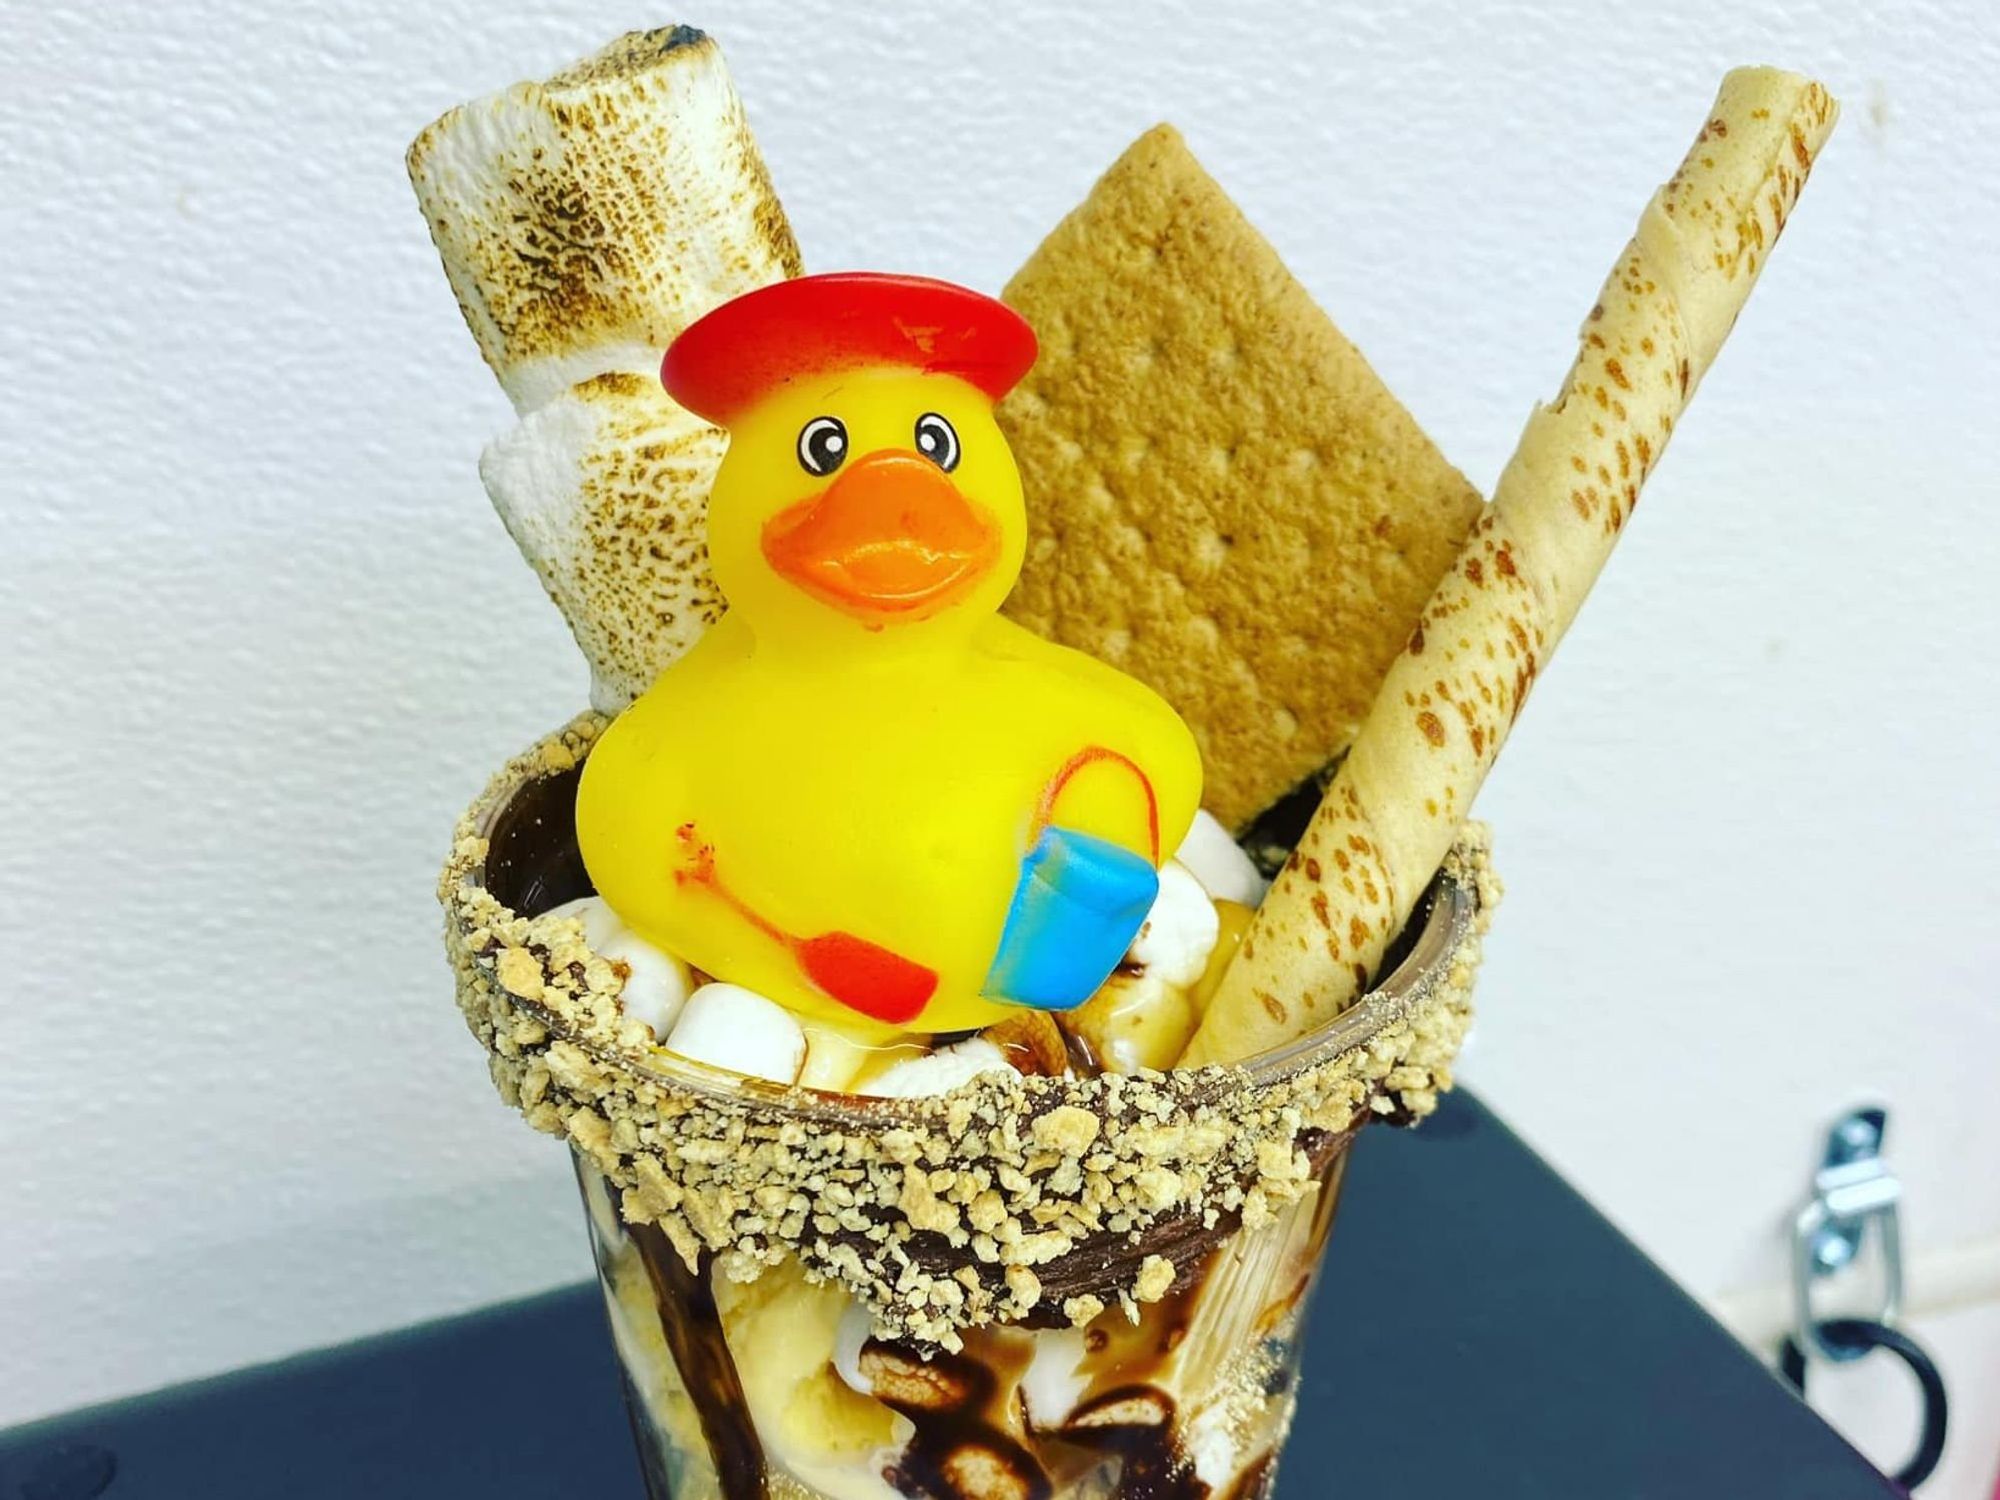 S'mores sundae with a rubber duck